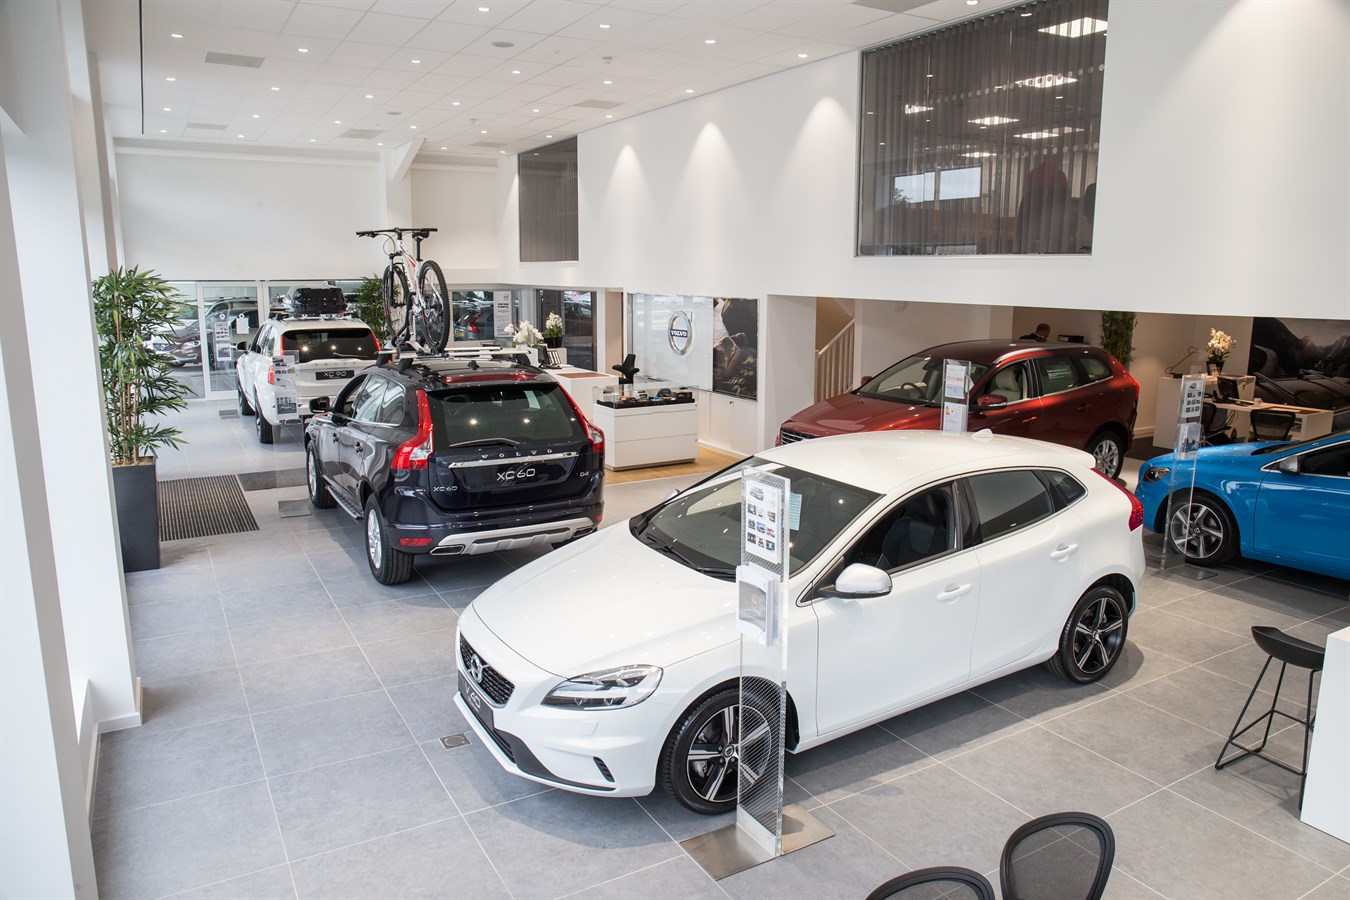 Volvo is investing in the UK motor trade with the launch of its ‘Sponsored Dealer’ programme